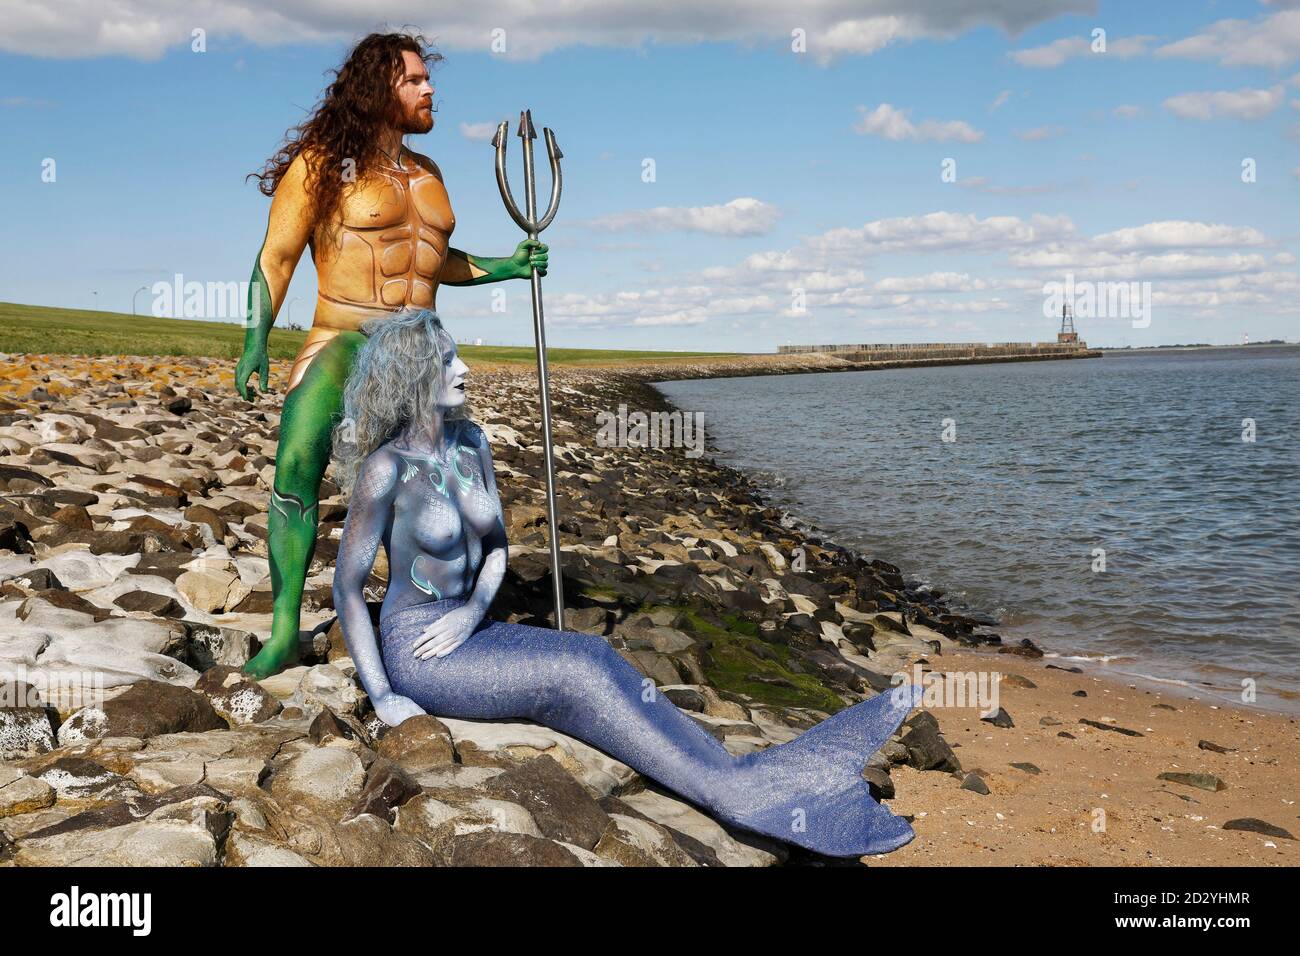 From the FARBKORPER calendar 2021 - Geek Art-Bodypainting and Transformaking: Aquaman and Nixe Photoshooting with Grave Artist and Janina S. at the Jadebusen in Wilhelmshaven. A project by the photographer Tschiponnique Skupin and the body painter and transformaker Enrico Lein | usage worldwide Stock Photo